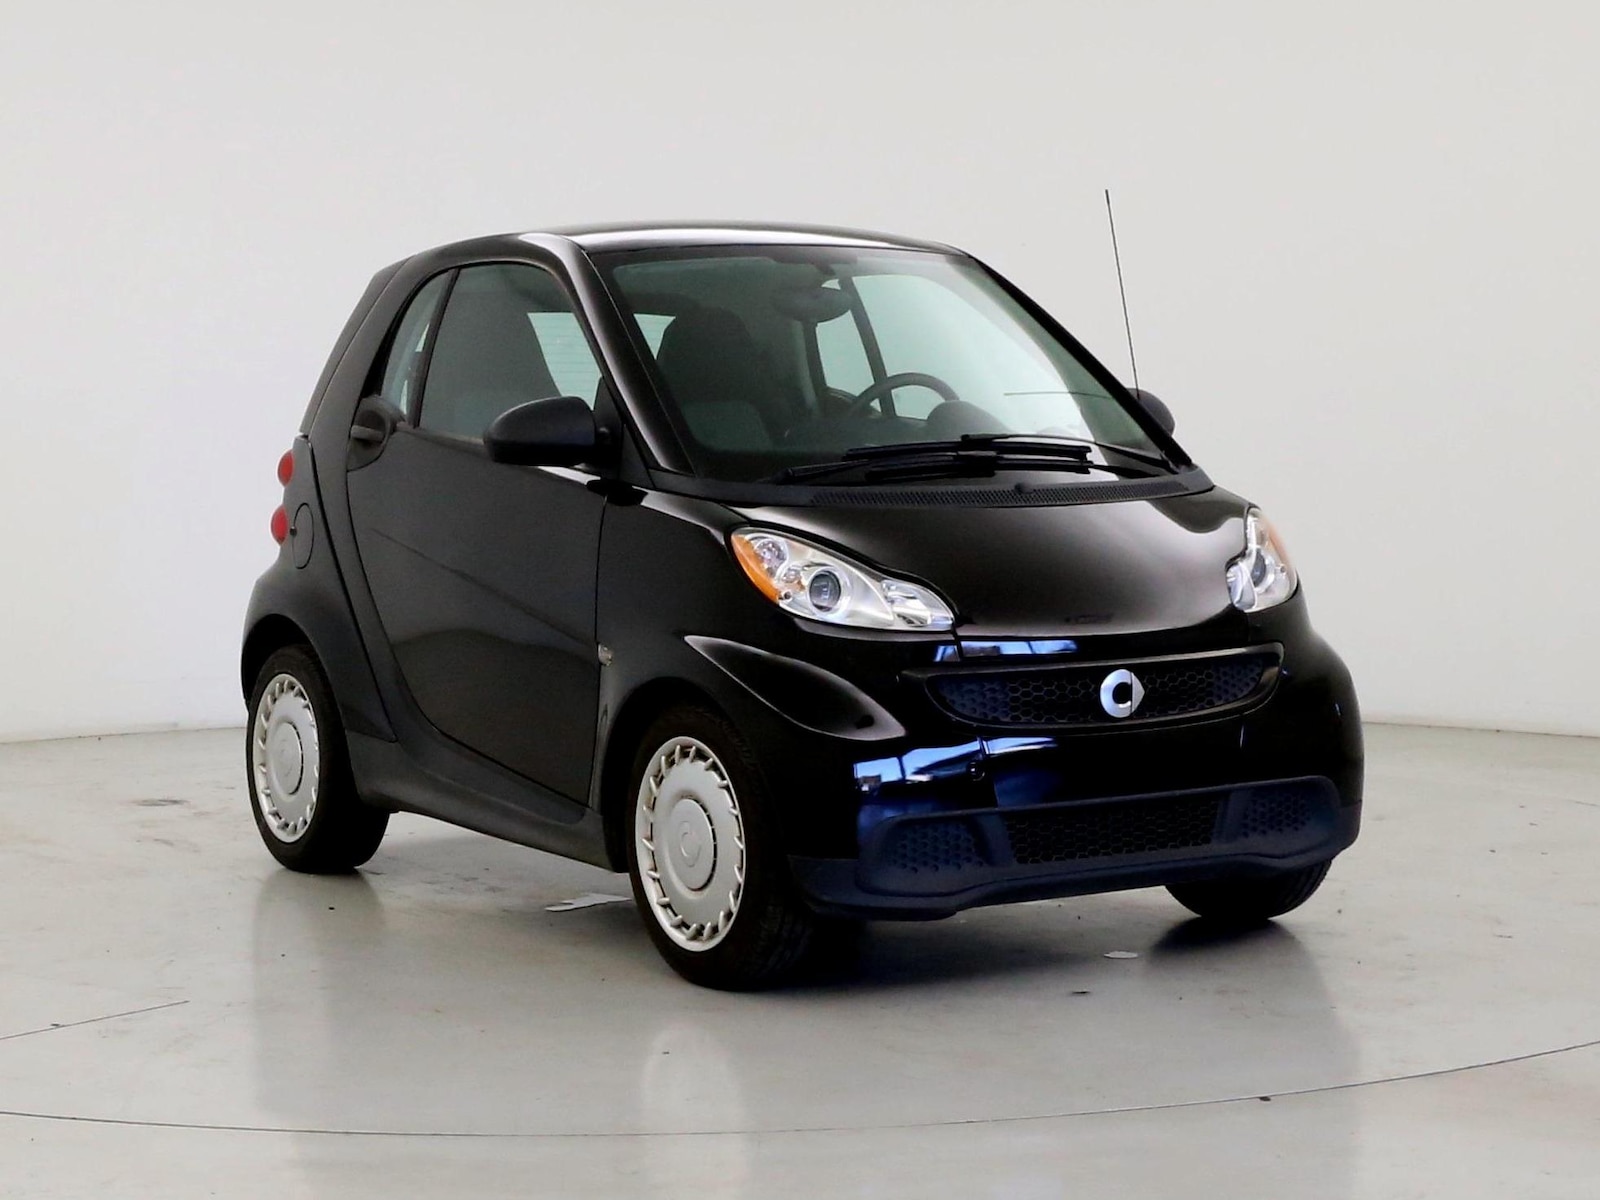 Used 2013 smart fortwo pure with VIN WMEEJ3BA7DK665922 for sale in Spokane Valley, WA